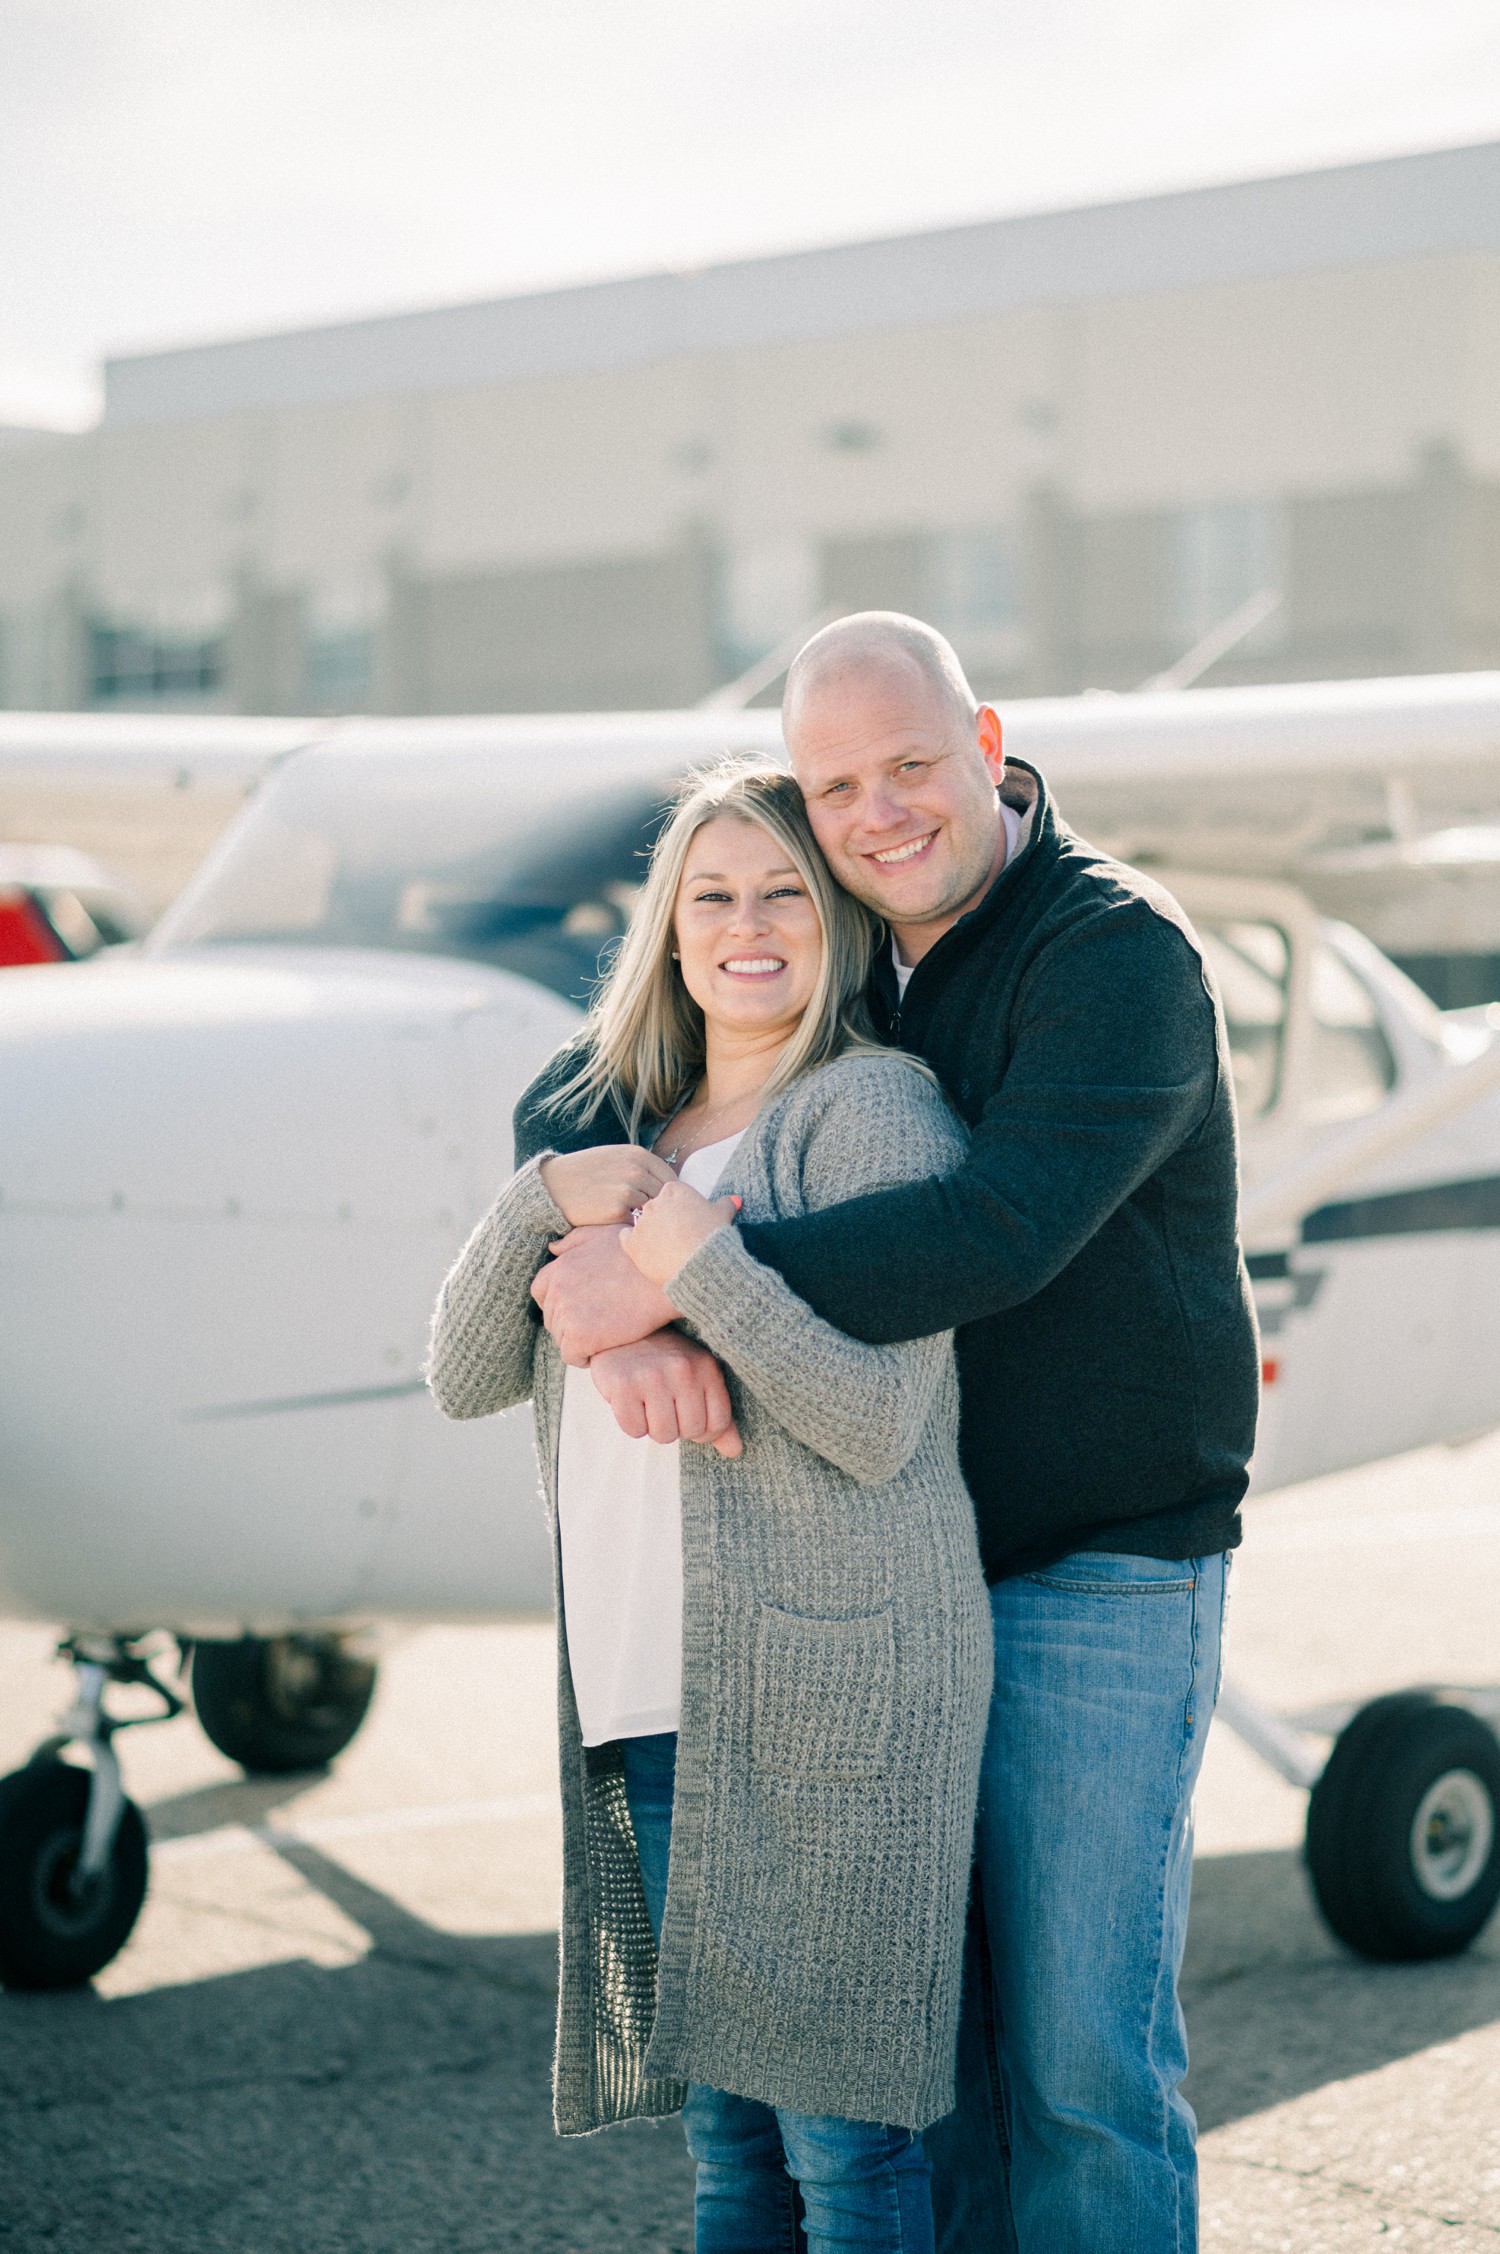 Couple engagement photos in front of airplane in Denver.